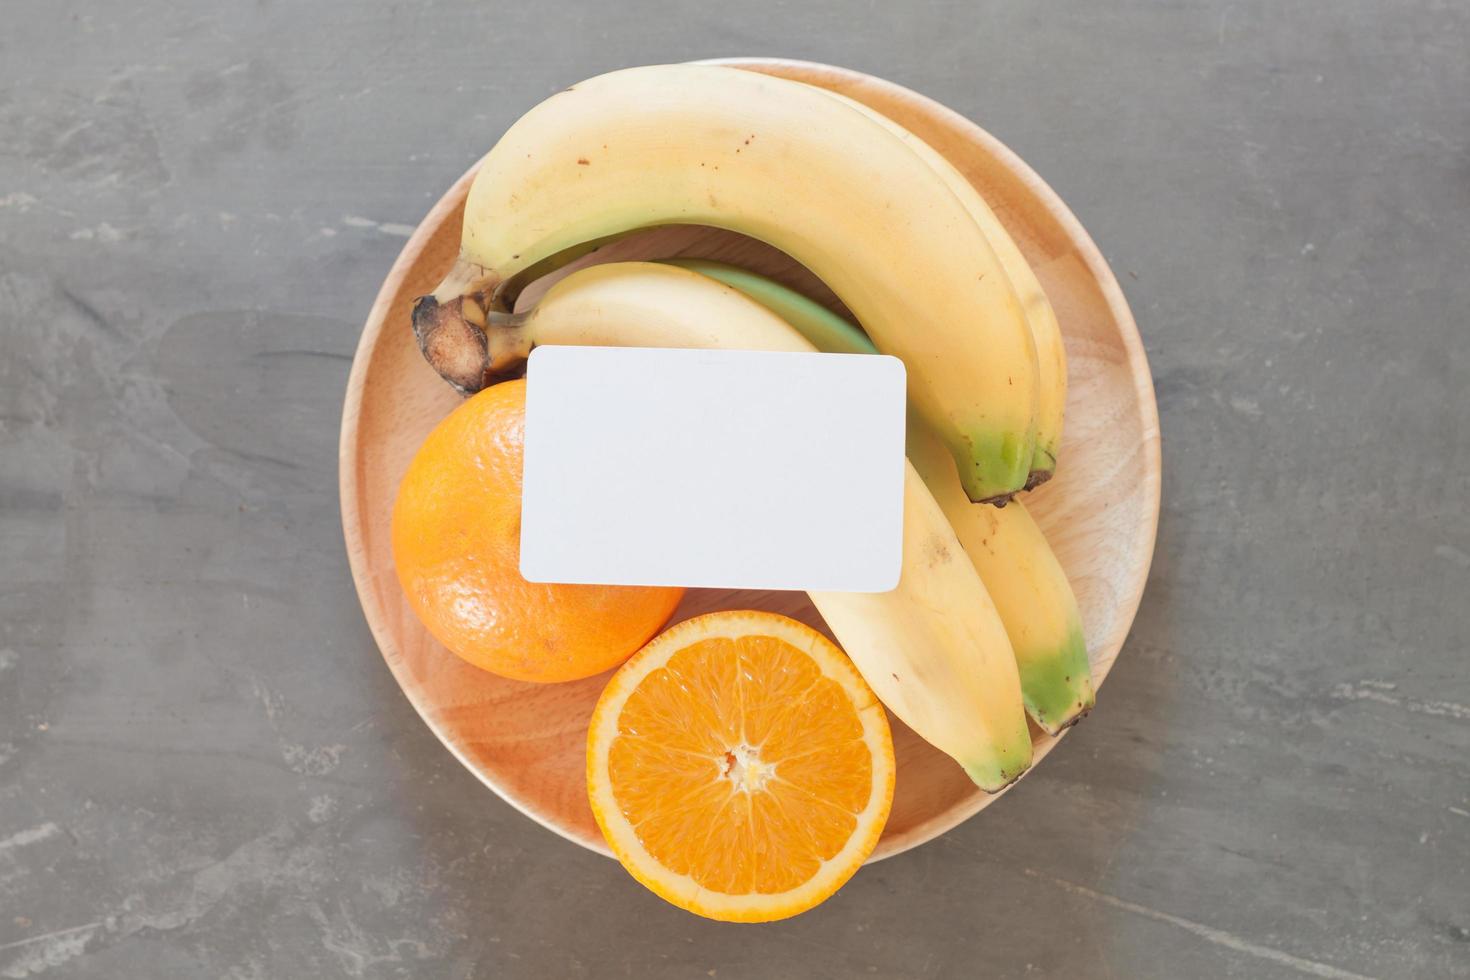 Blank business card on a bowl of fruit photo